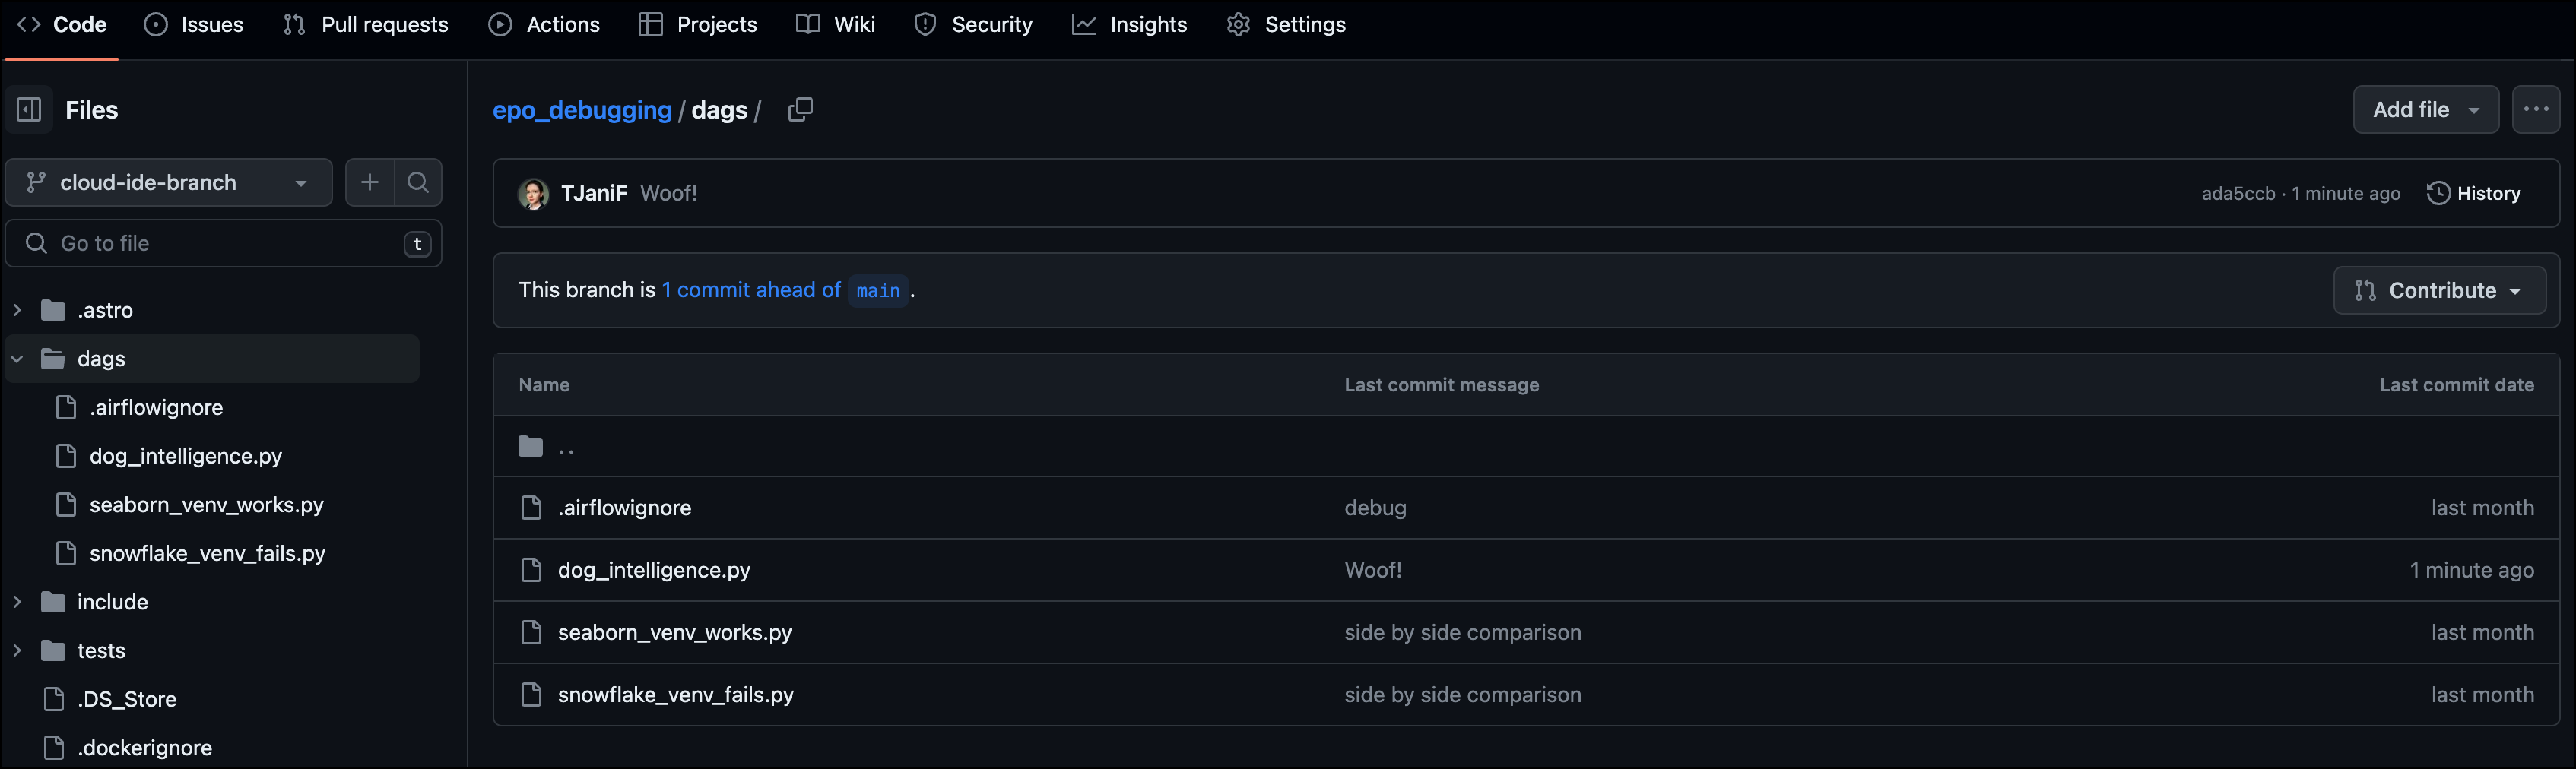 Screenshot of the GitHub UI showing the dog_intelligence dag in the DAGs folder with the last commit being Woof!.